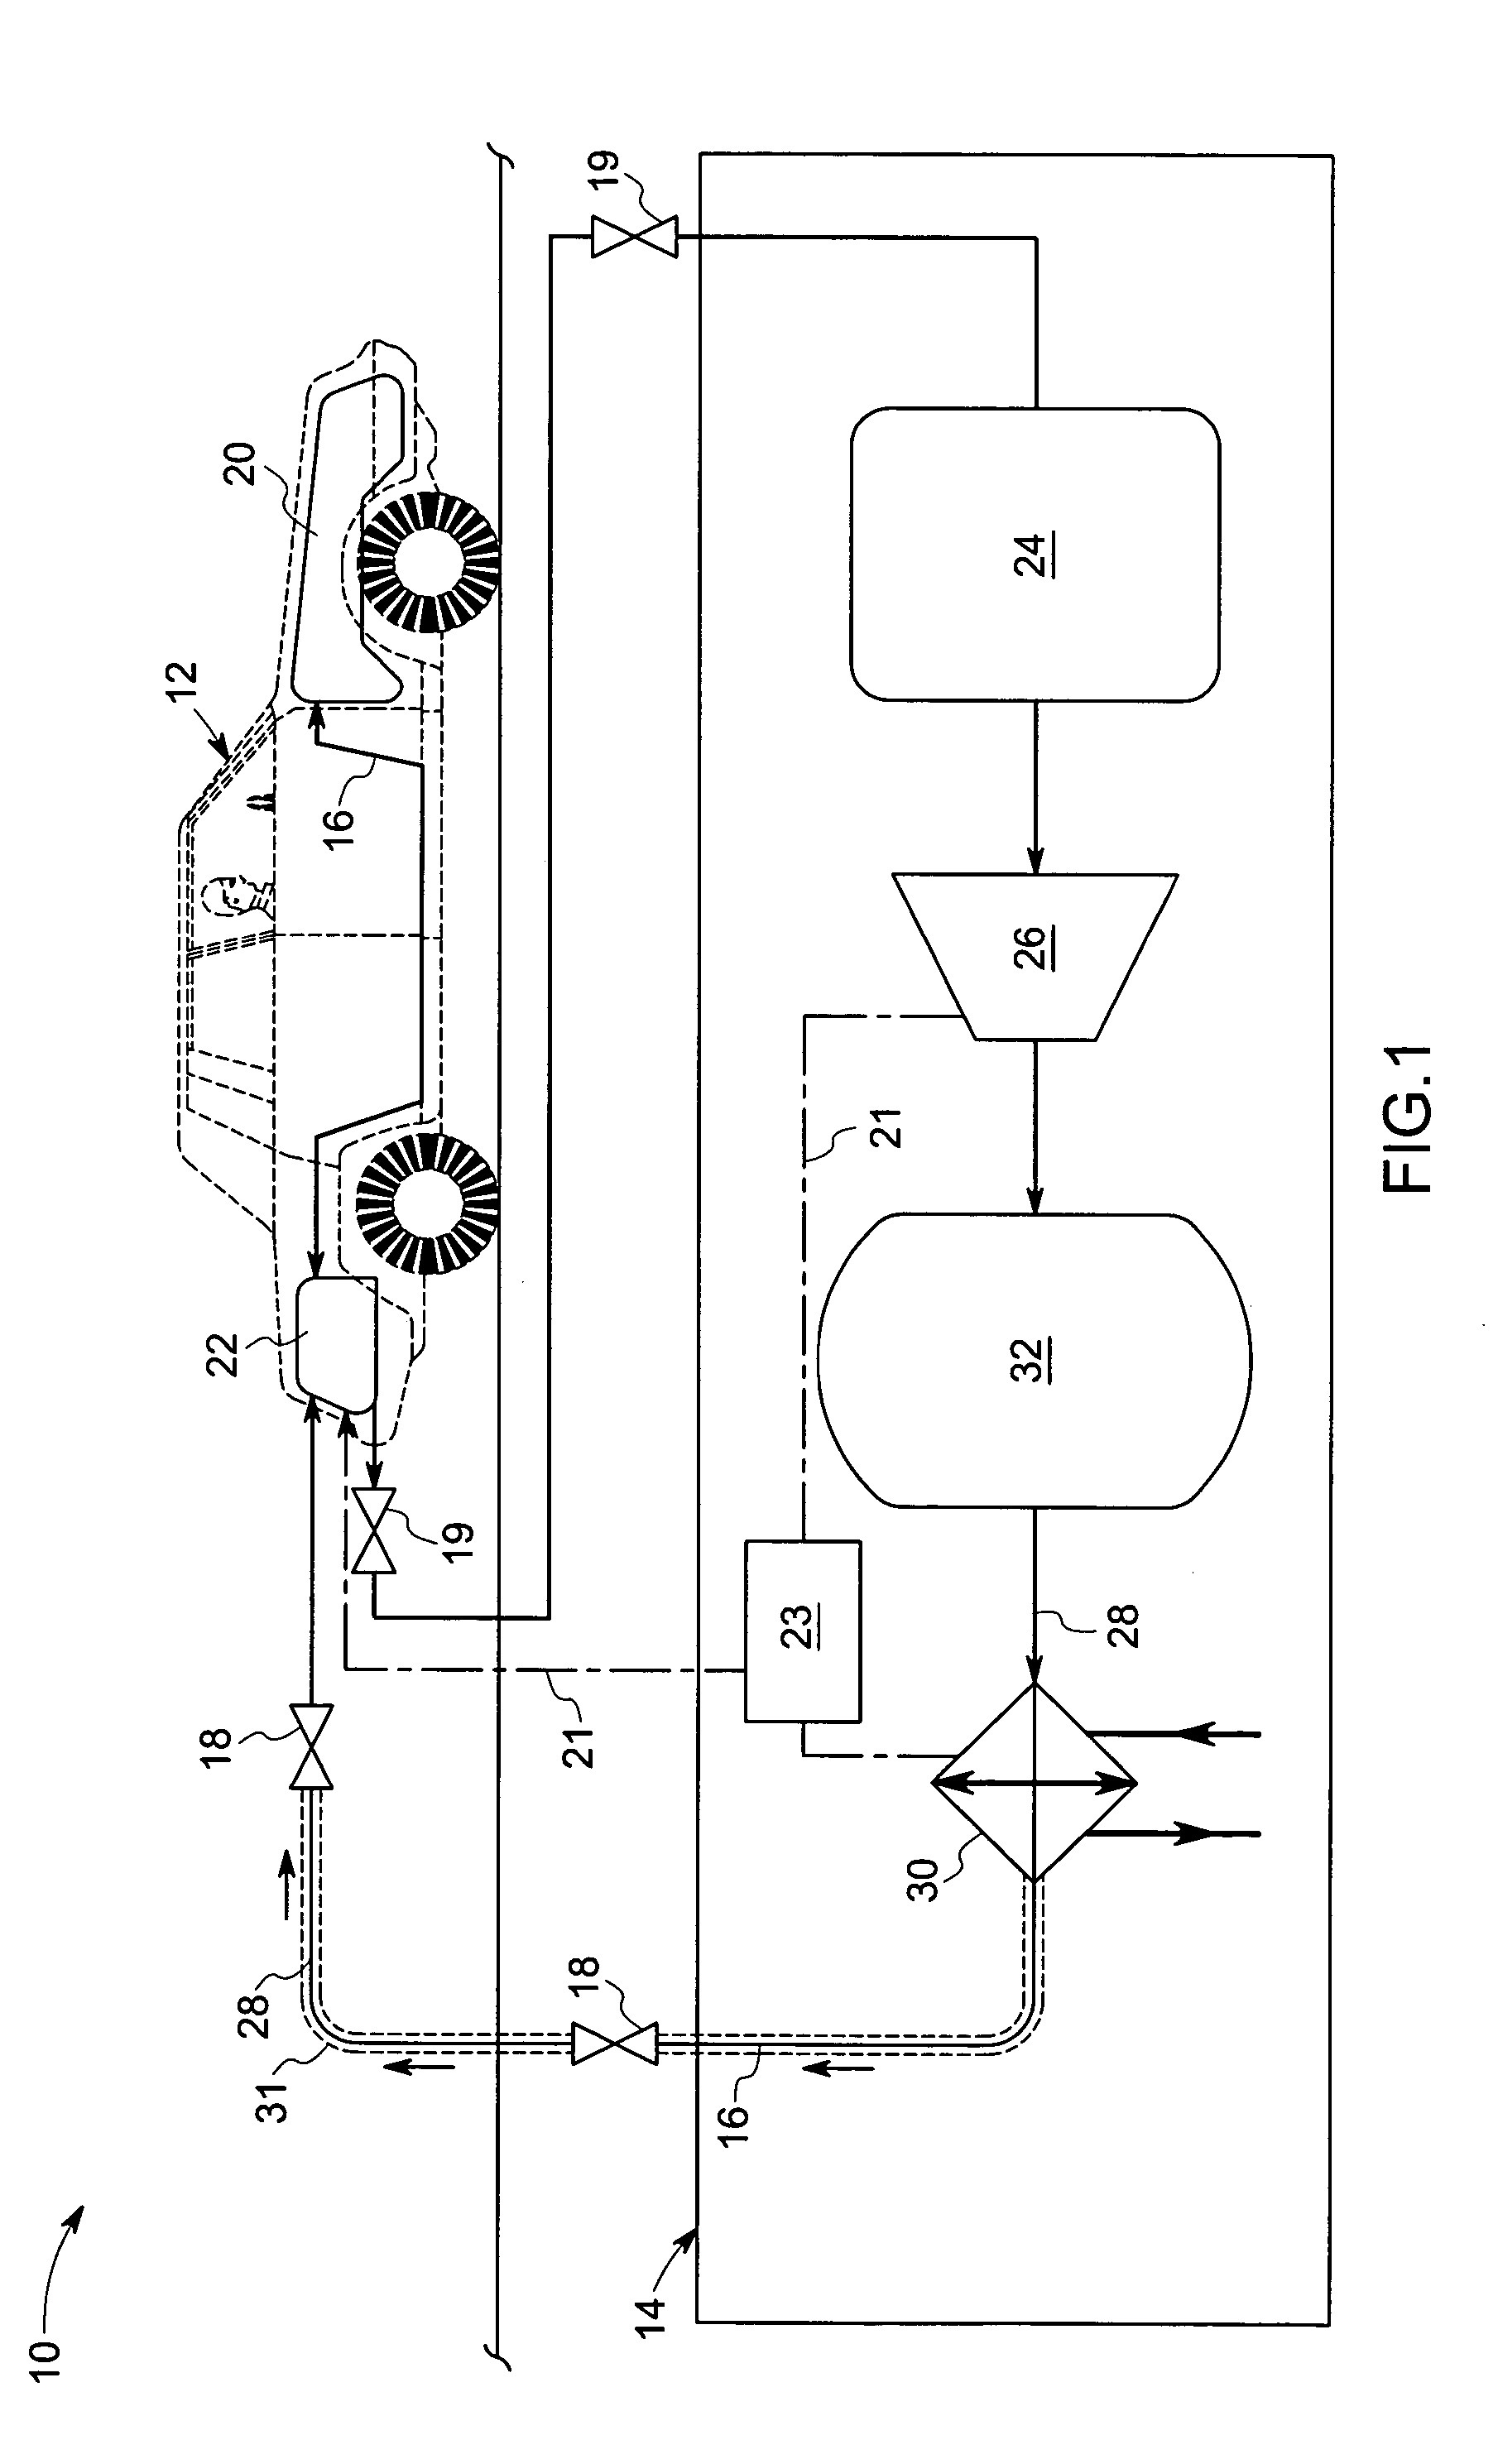 System and method for storing and discharging hydrogen